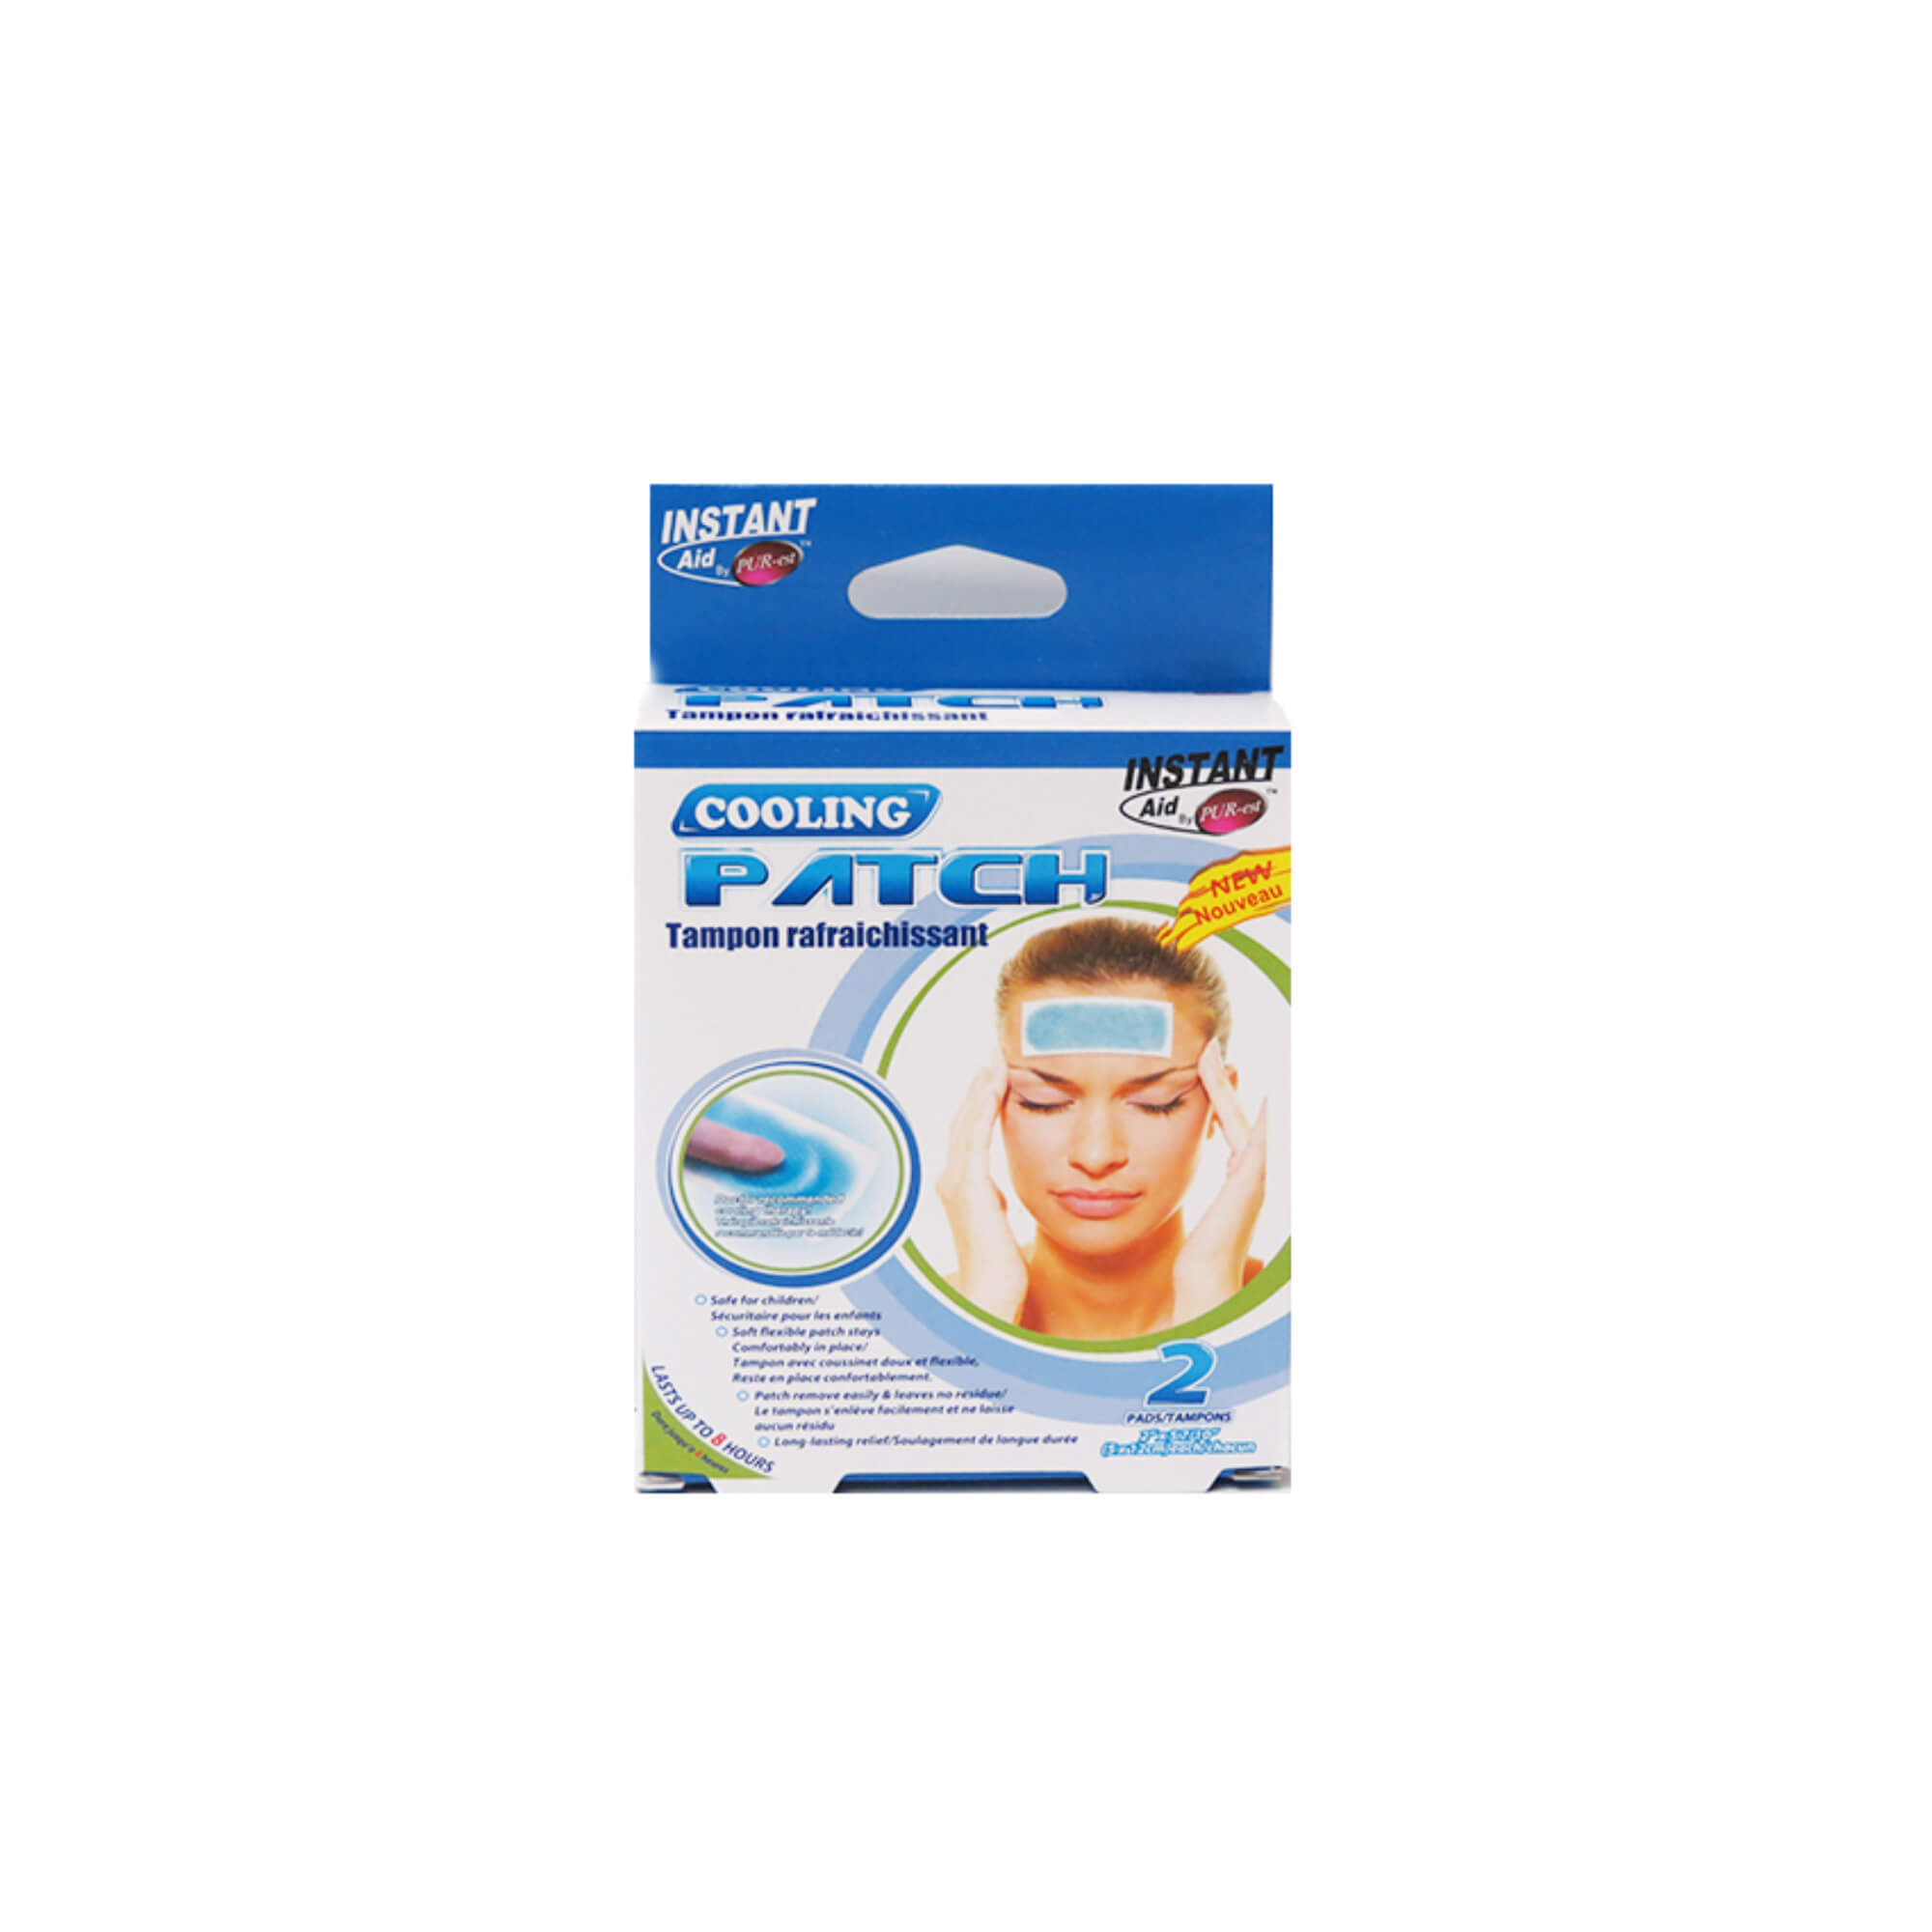 Instant Aid Cooling Pain Releasing Patch 2 Pads, Pack of 3